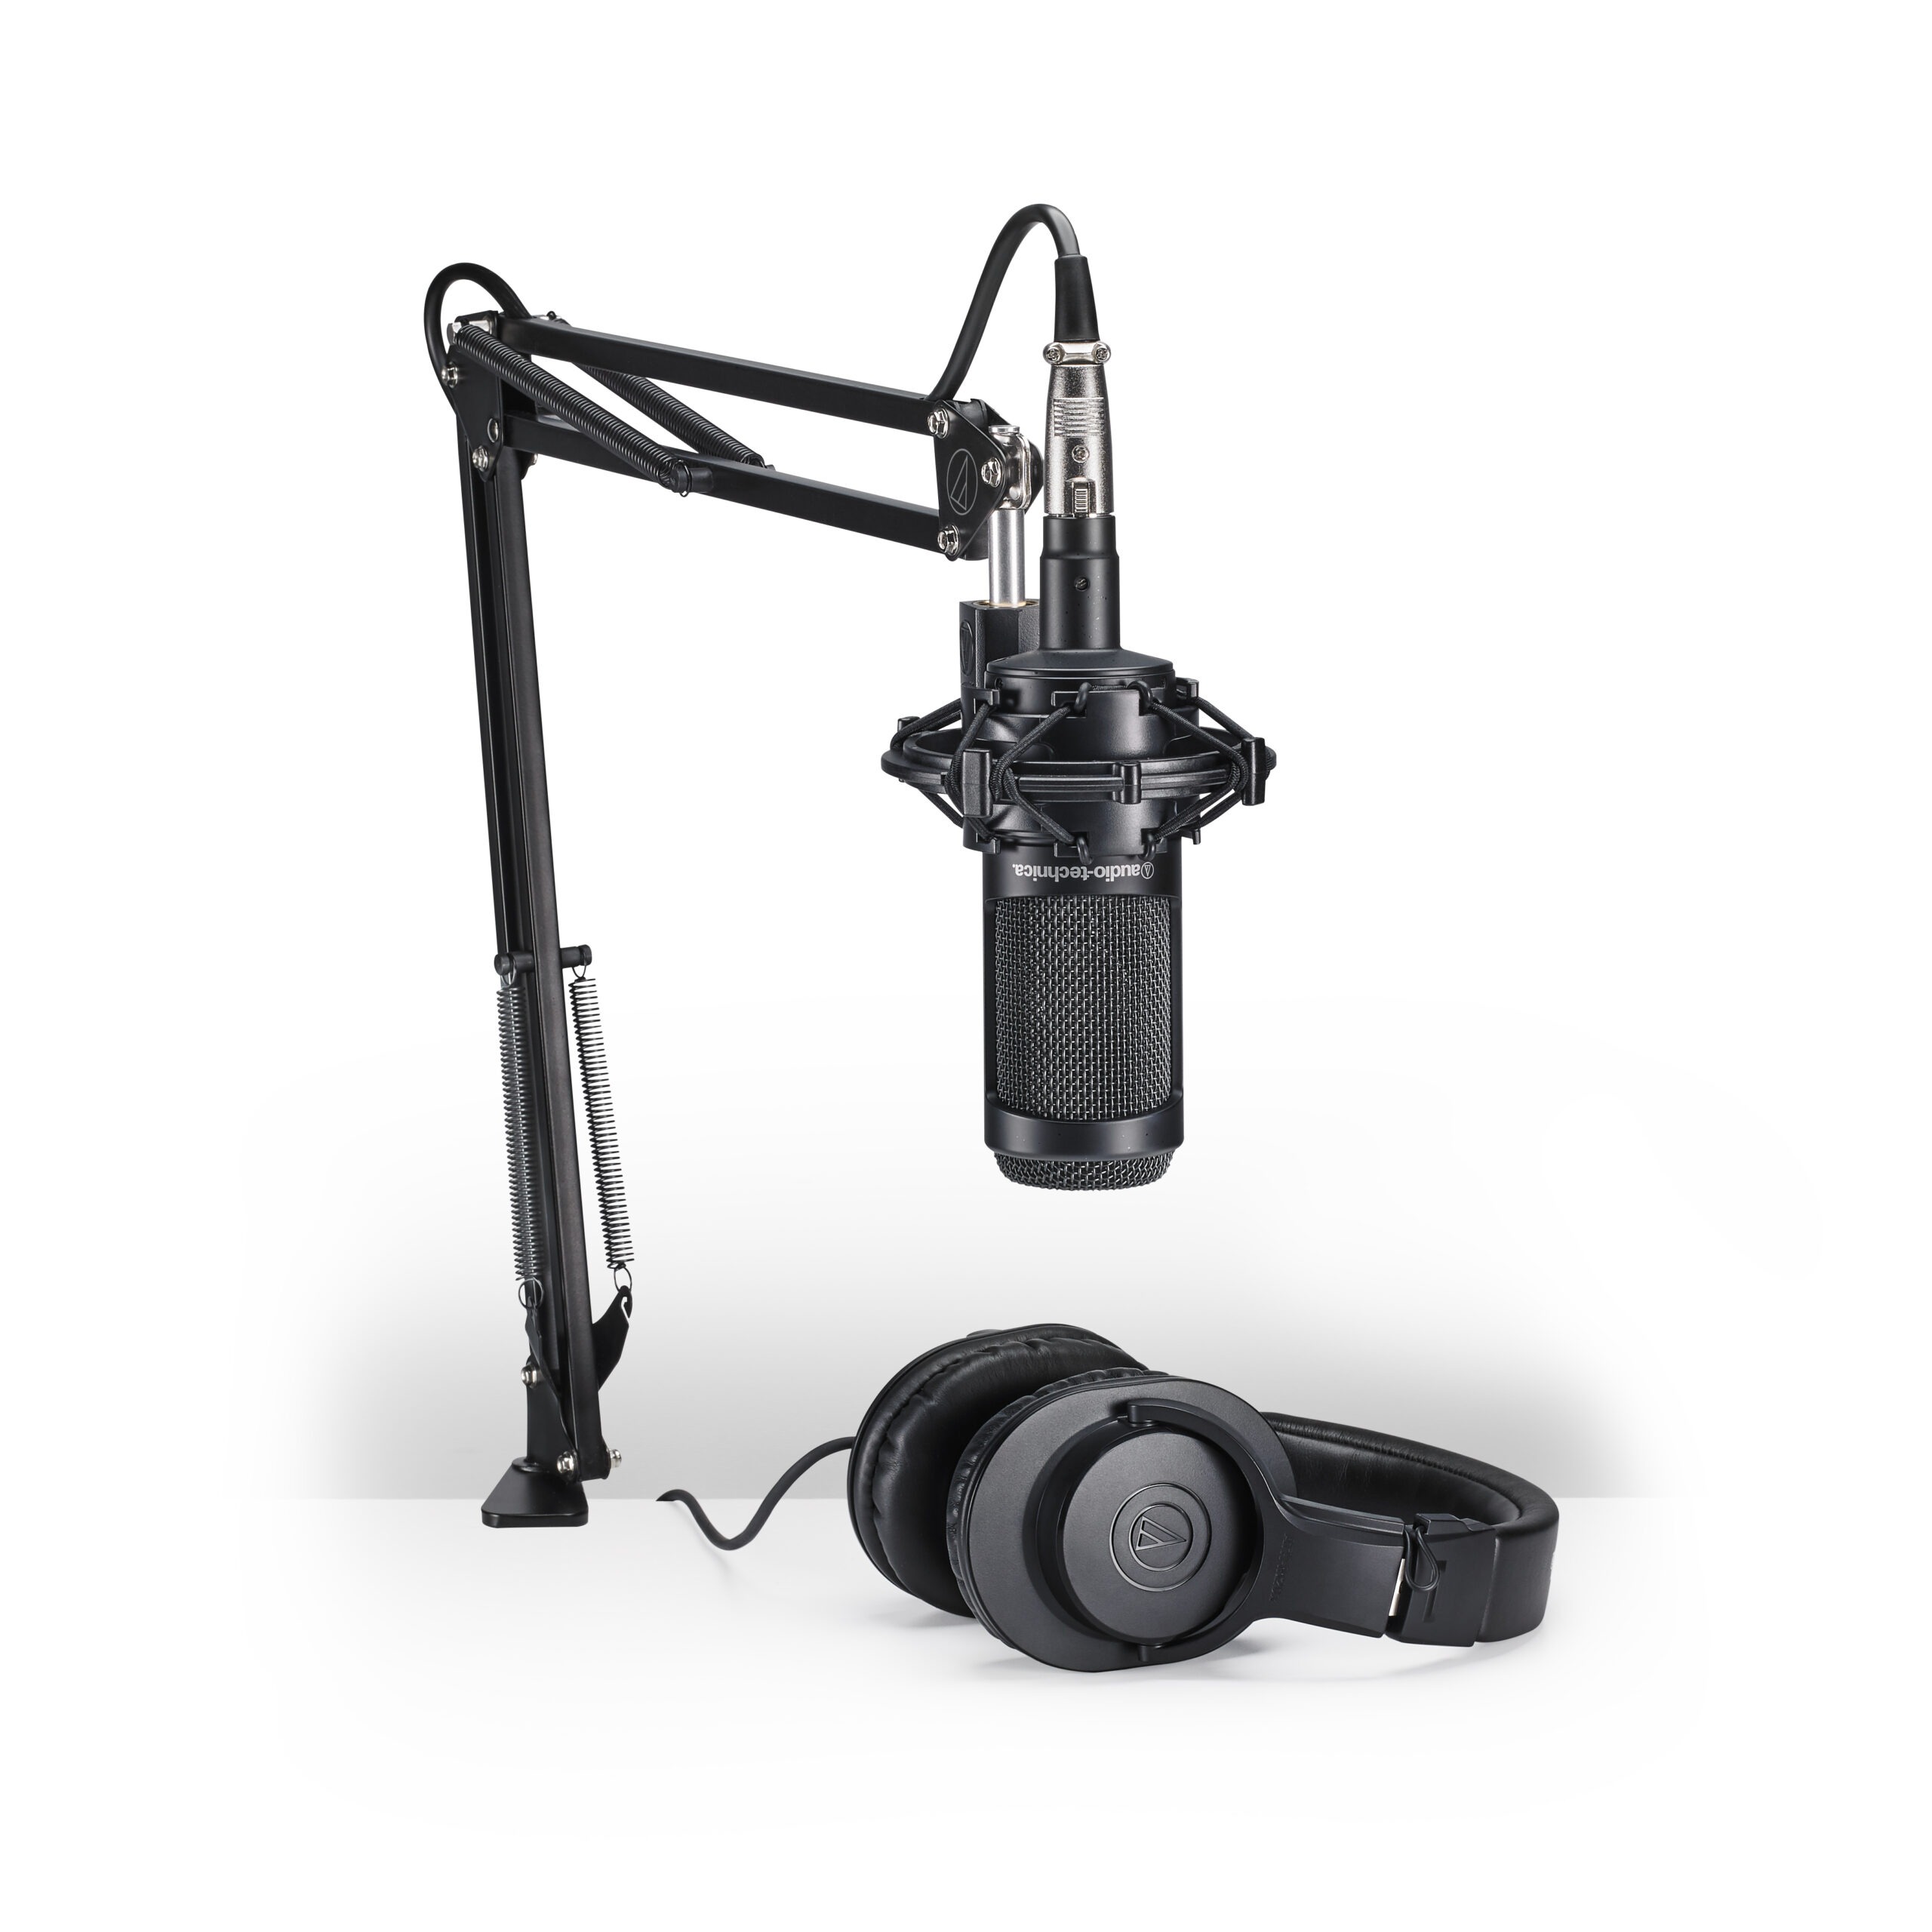 Audio-Technica AT2035 Studio Microphone Pack with ATH-M20x and Boom Arm 1188666-scaled Black Friday Digital DJ Gear